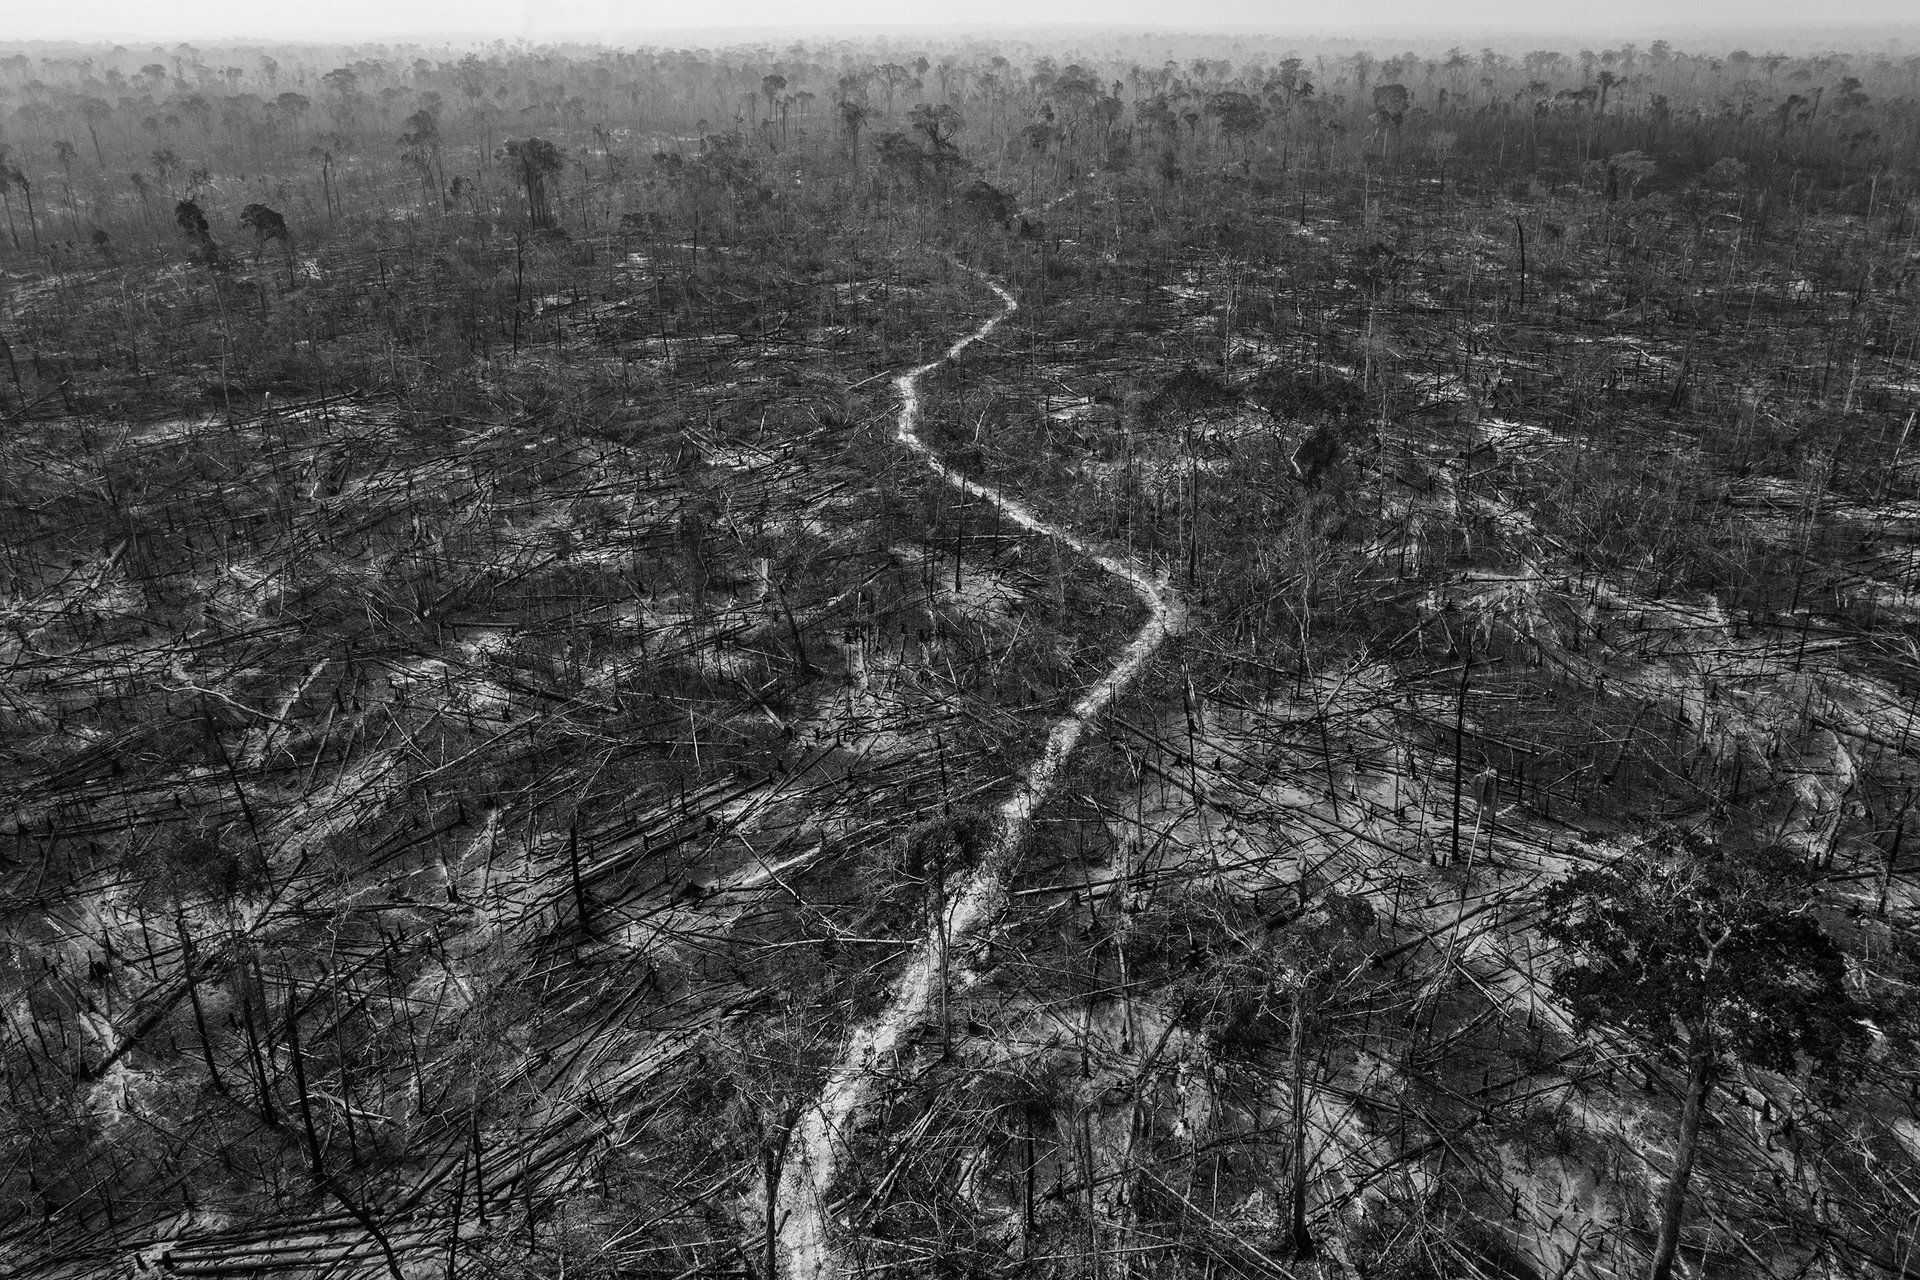 Massive deforestation is evident in Apuí, a municipality along the Trans-Amazonian Highway, southern Amazon, Brazil. Apuí is on the front line of agricultural expansion in the Amazon, and is one of the region&rsquo;s most deforested municipalities.